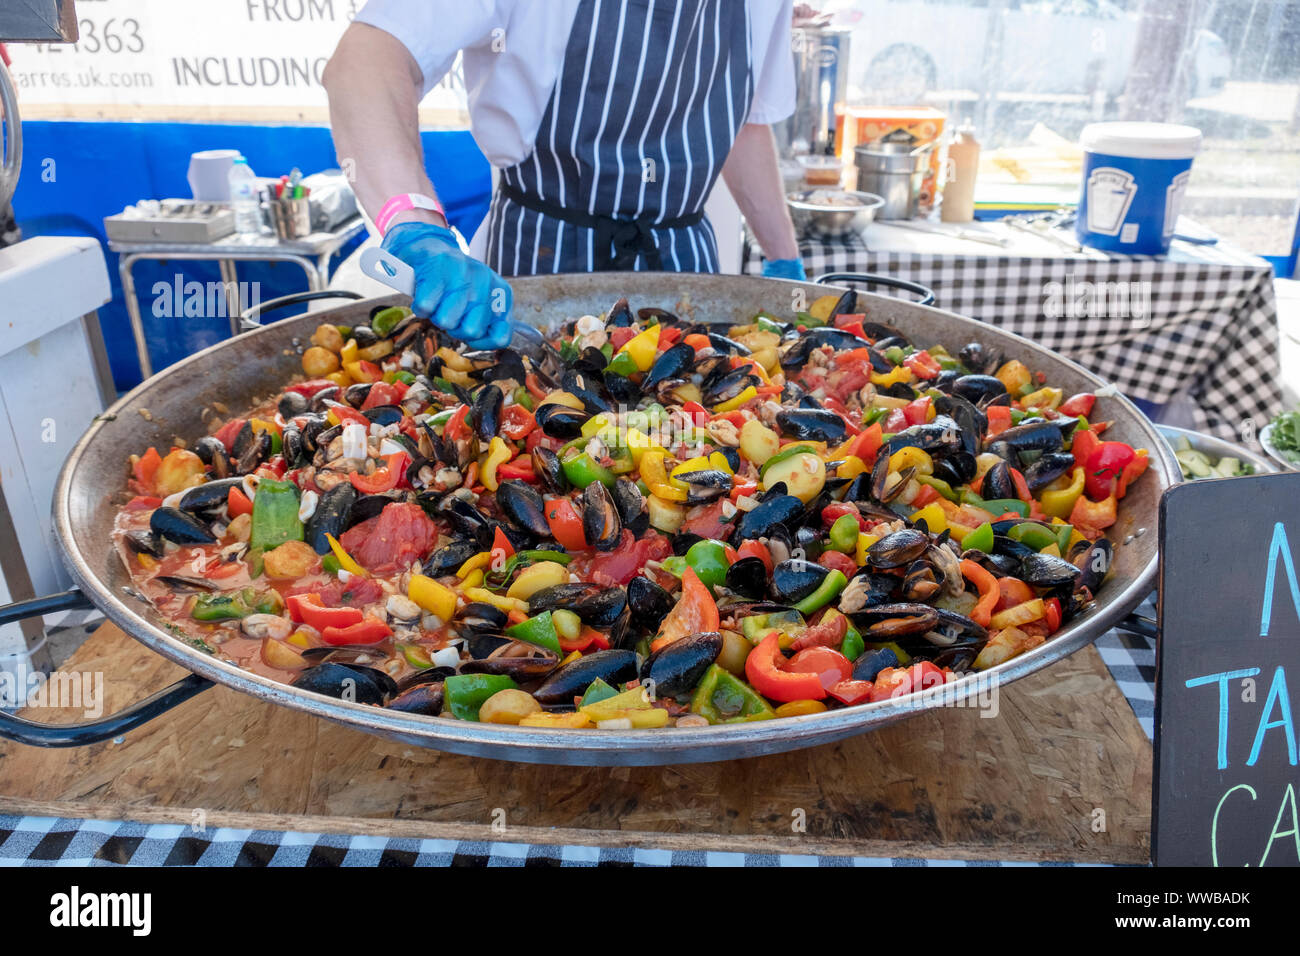 Chefs from Pissaro's restaurant prepare a colourful paella at the annual Hastings Seafood Festival 2019 Stock Photo